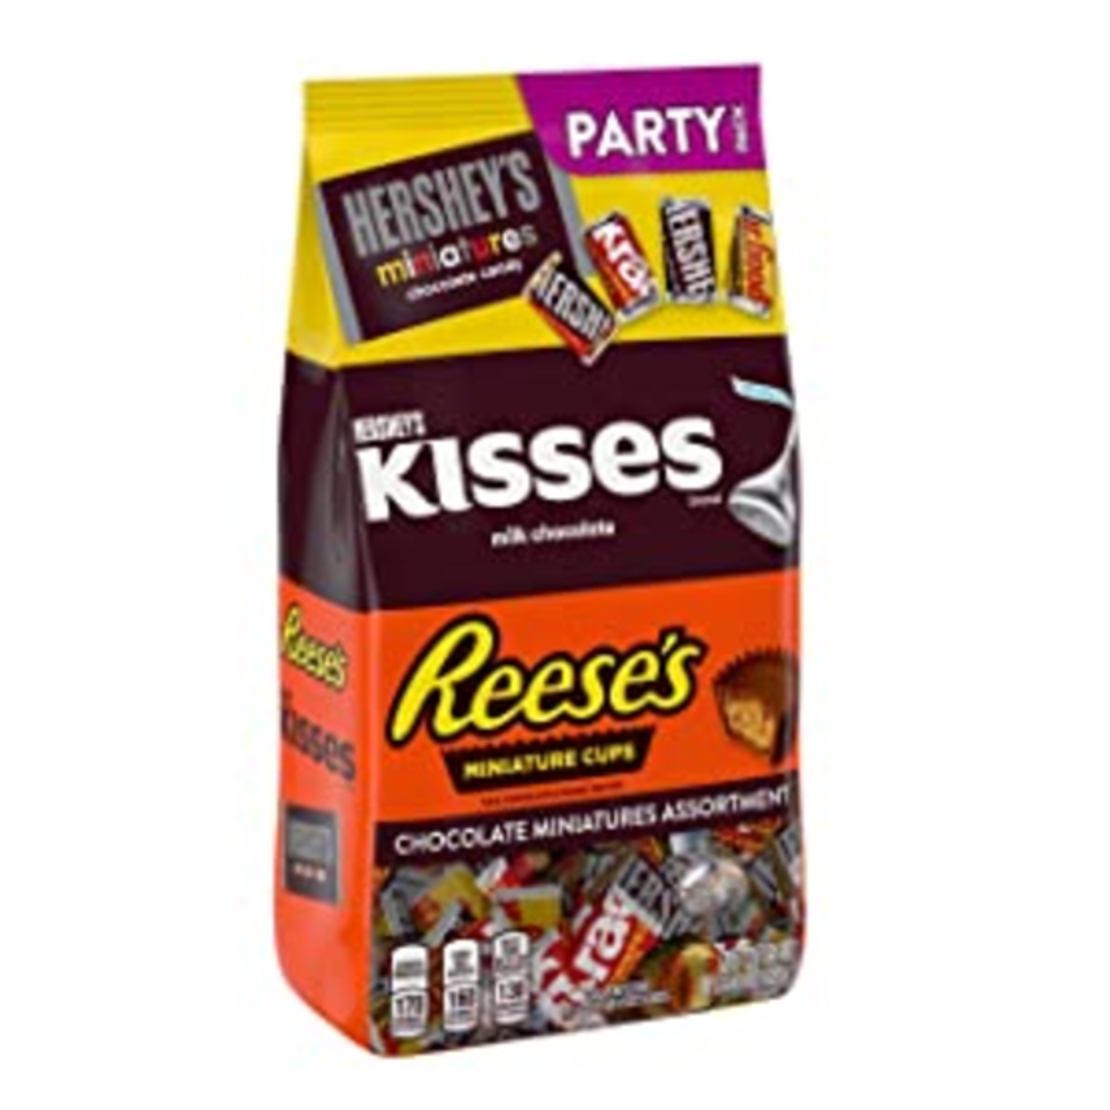 Party Pack - Mix Chocoloates Hershey's , Kisses & Reese's 992g 